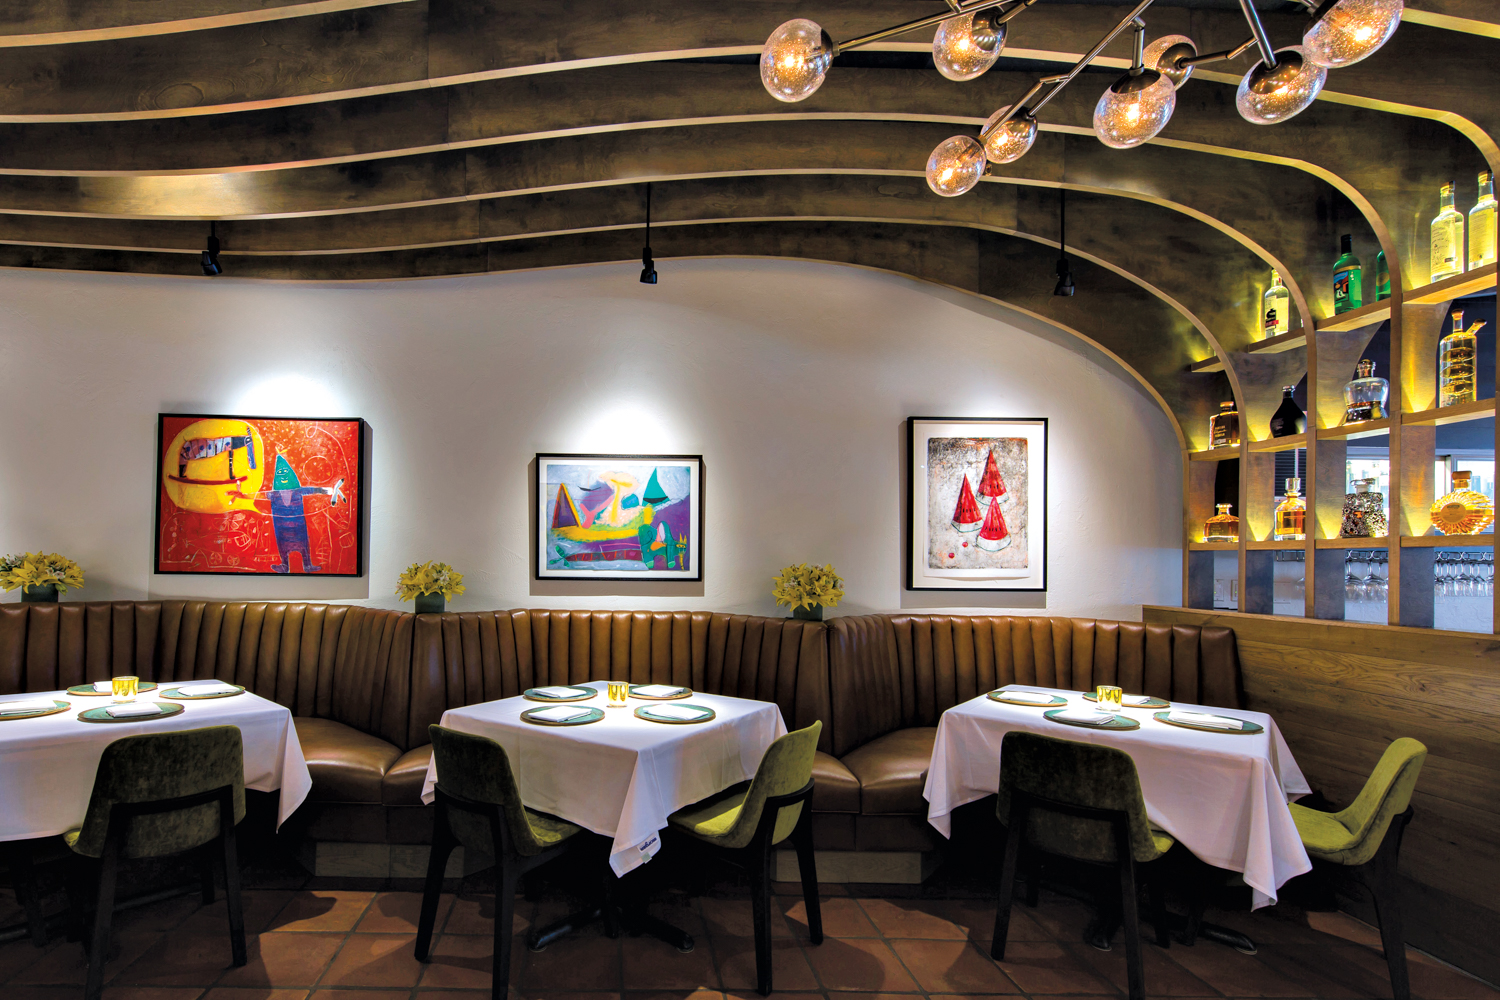 Food + Art Intertwine At This Chicago Eatery